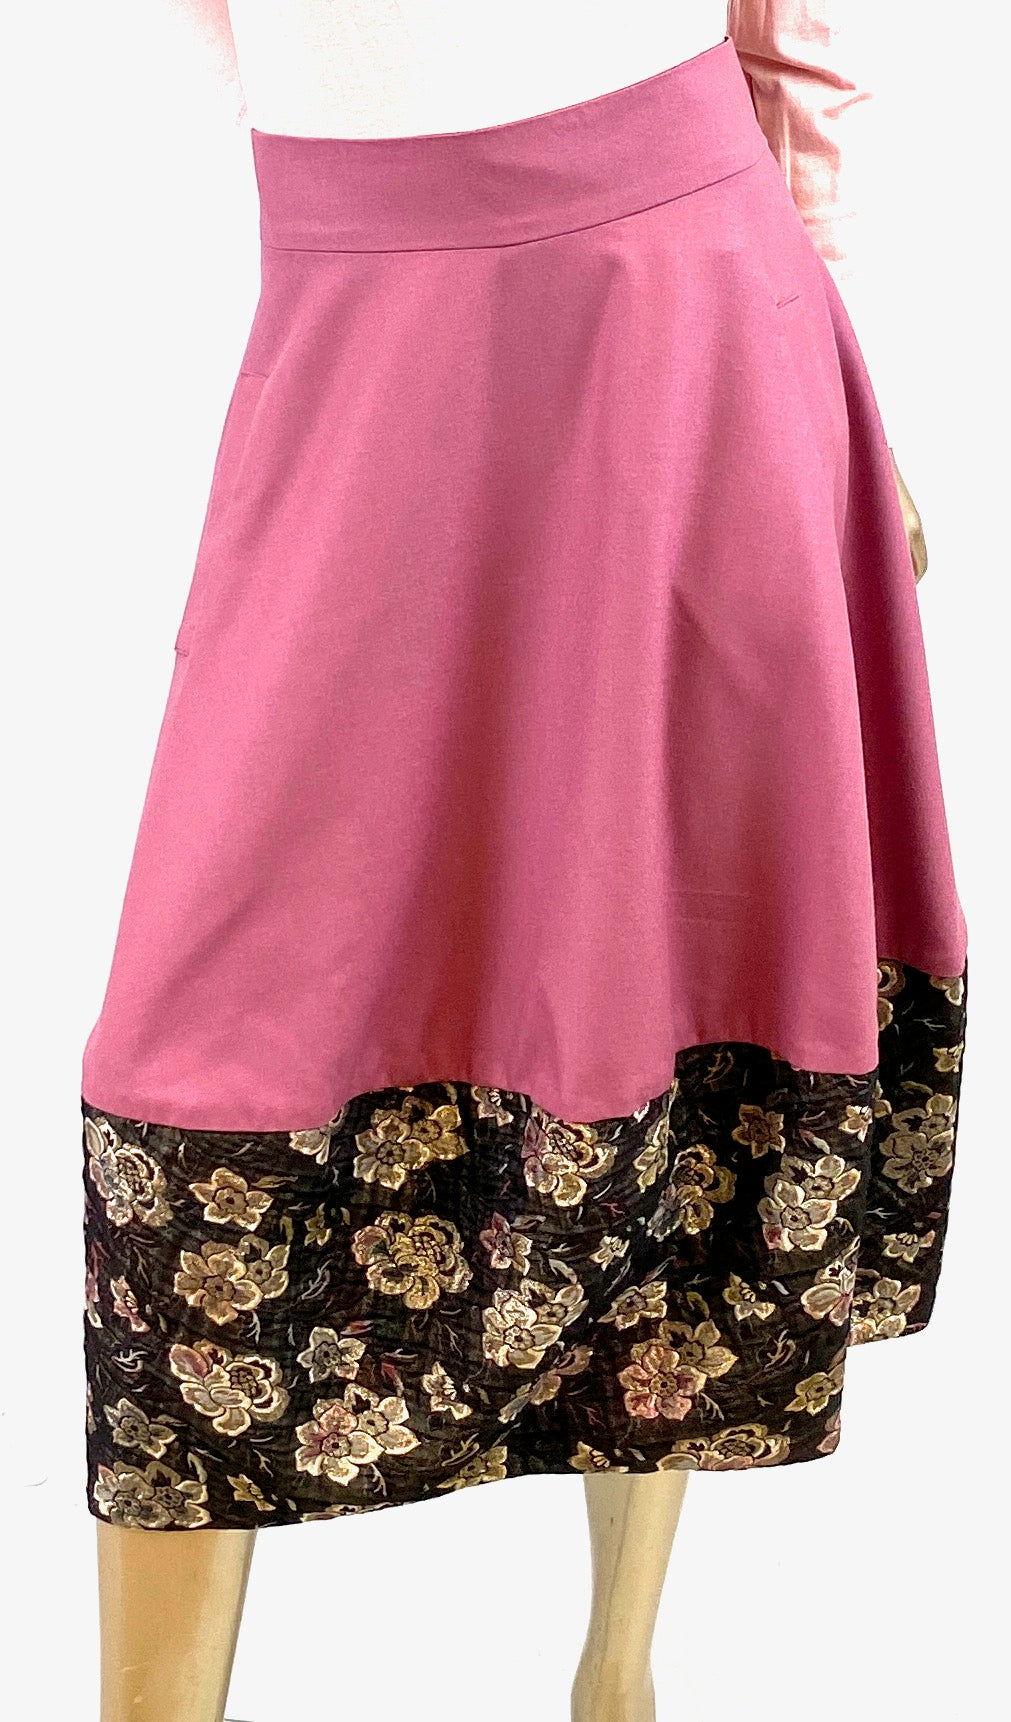 Bubble style/Tulip skirt made with wool /cshmire blend & brocade panel